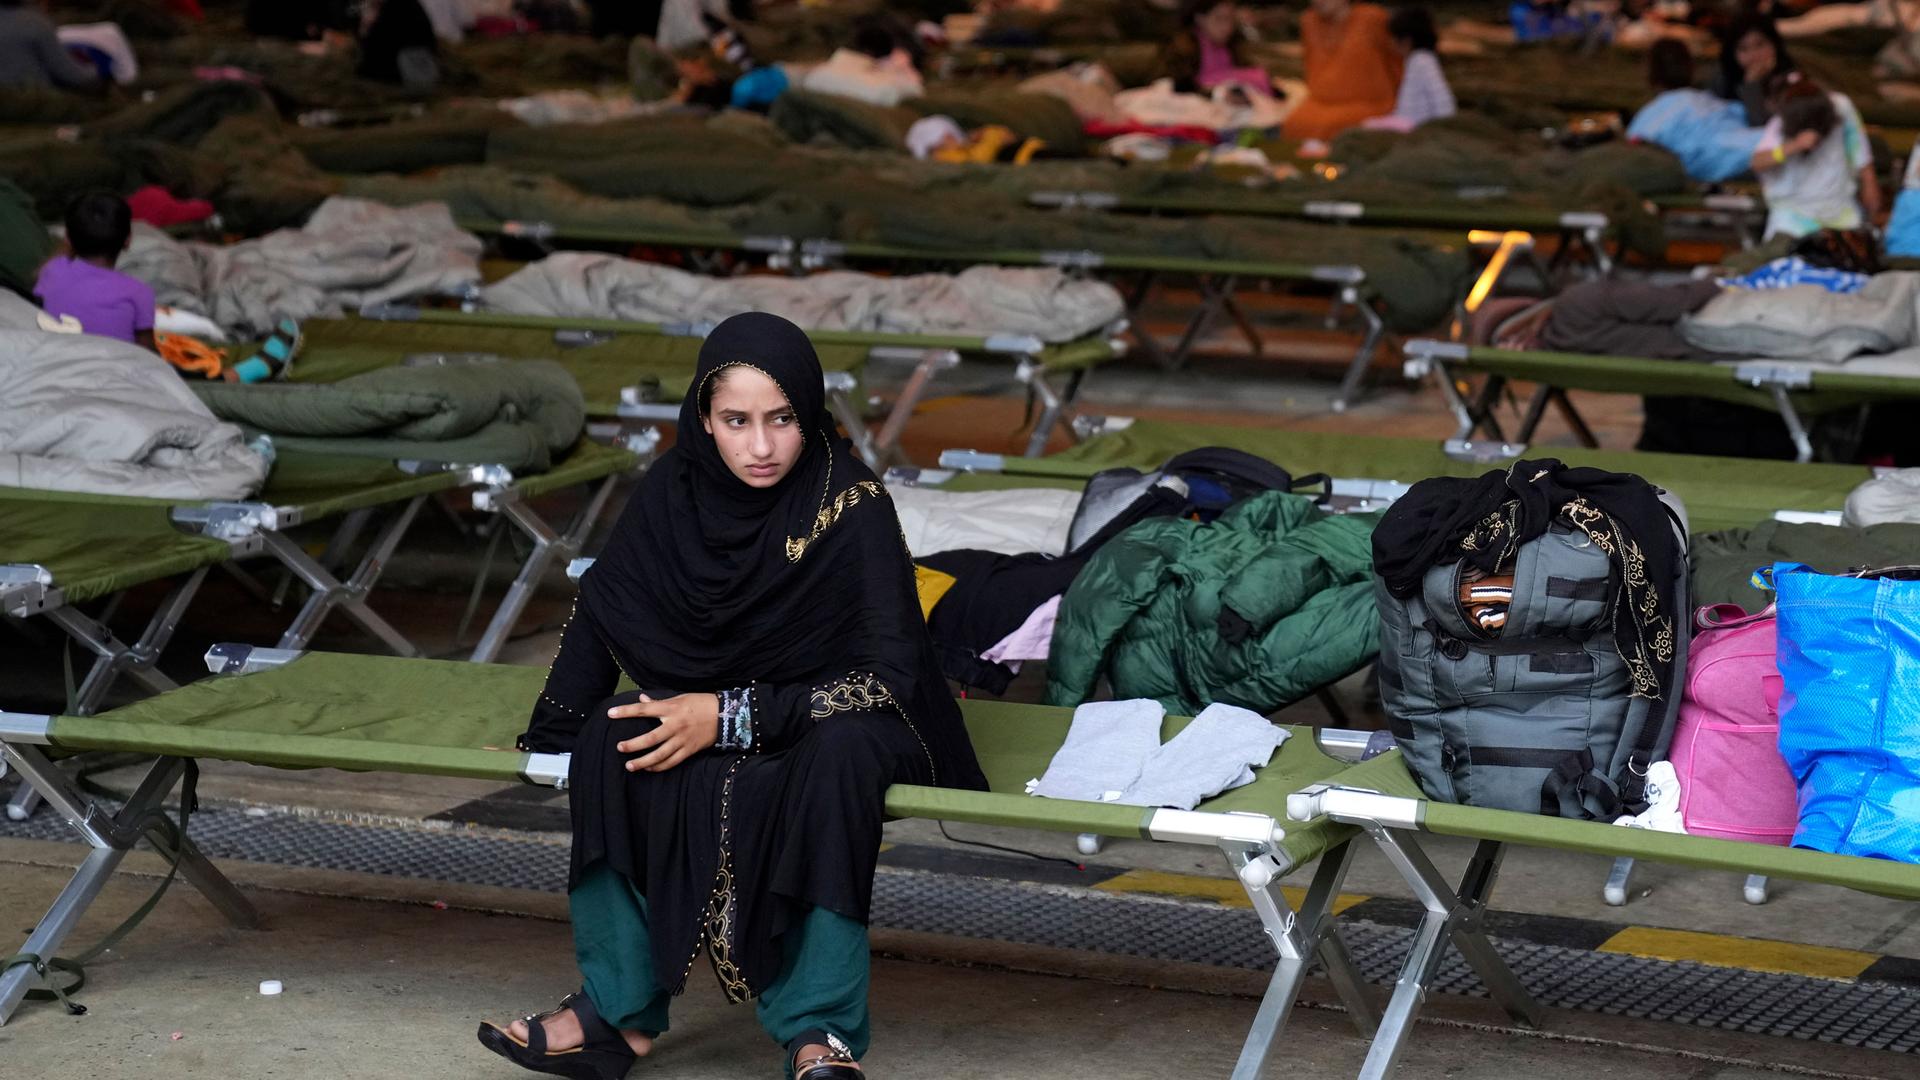 A young woman is shown sitting on a green cot, among dozens over other cots, each with personal belongings on top.